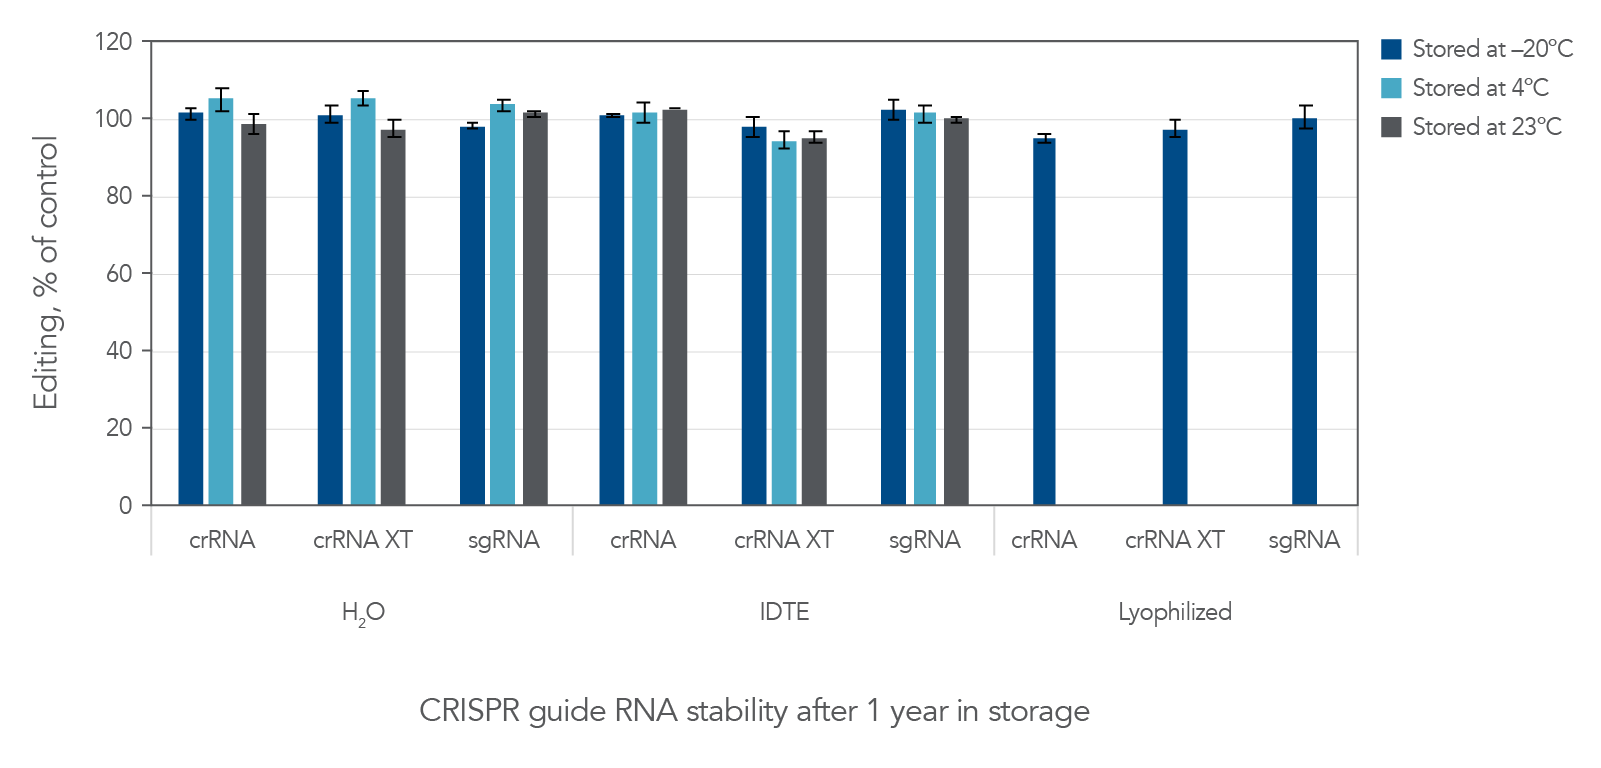 CRISPR gRNA is stable over 1 year